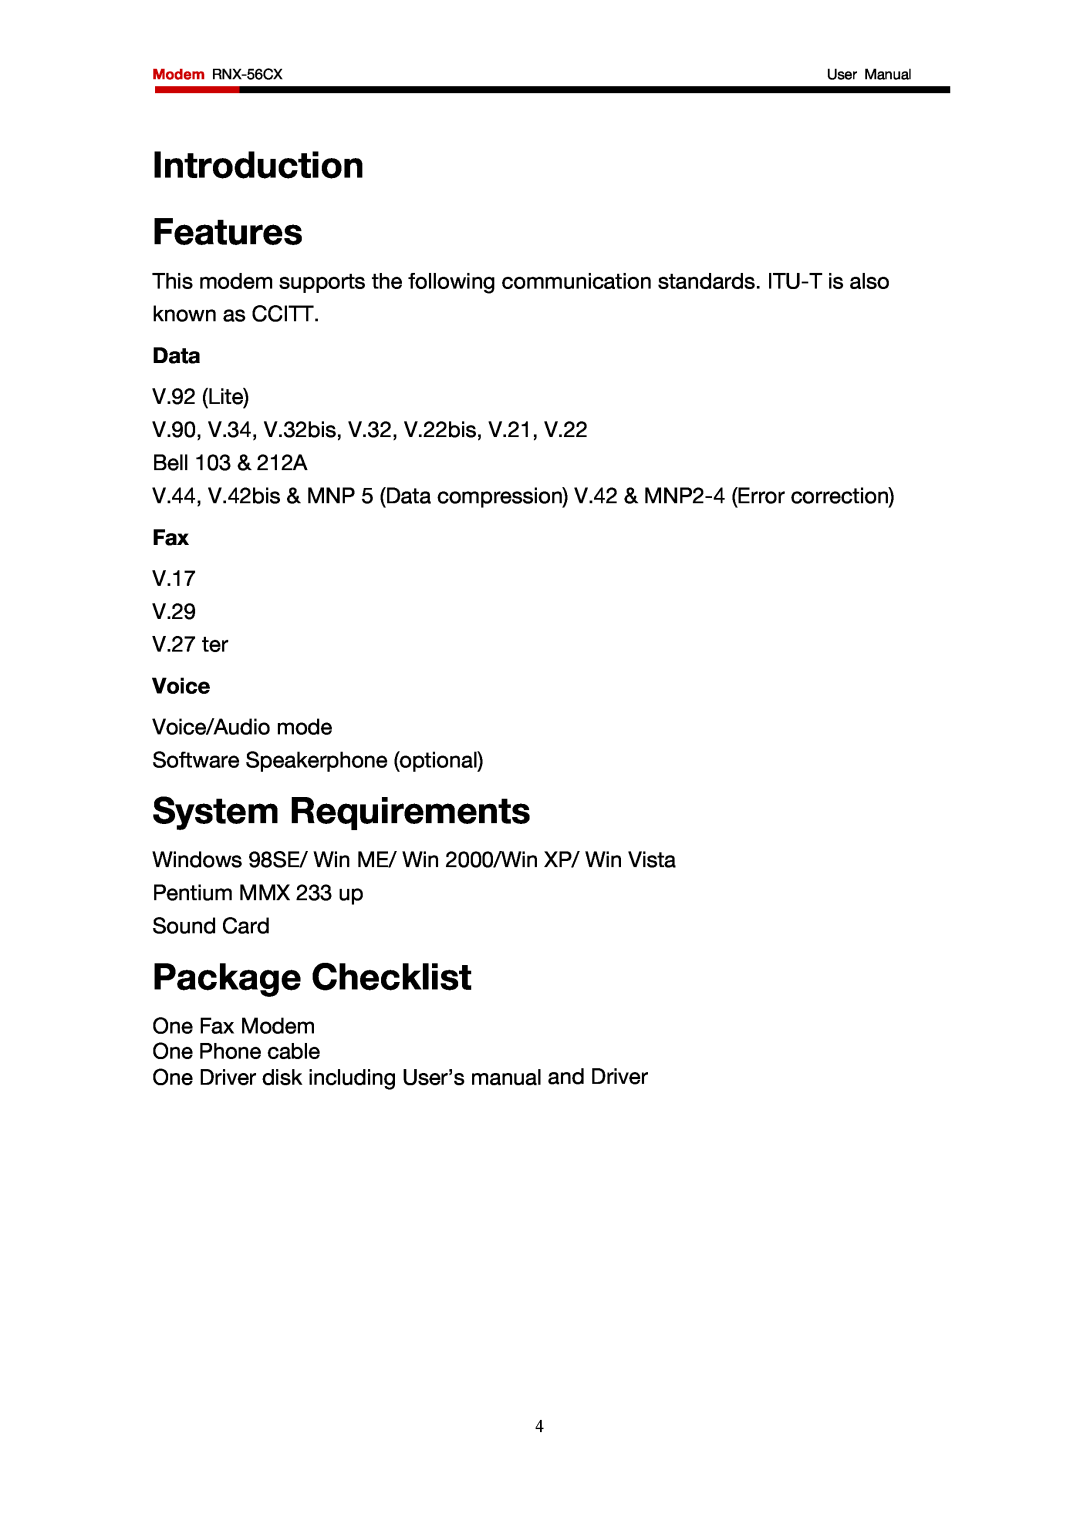 Rosewill RNX-56CX user manual Introduction Features, System Requirements, Package Checklist, Data, Voice 